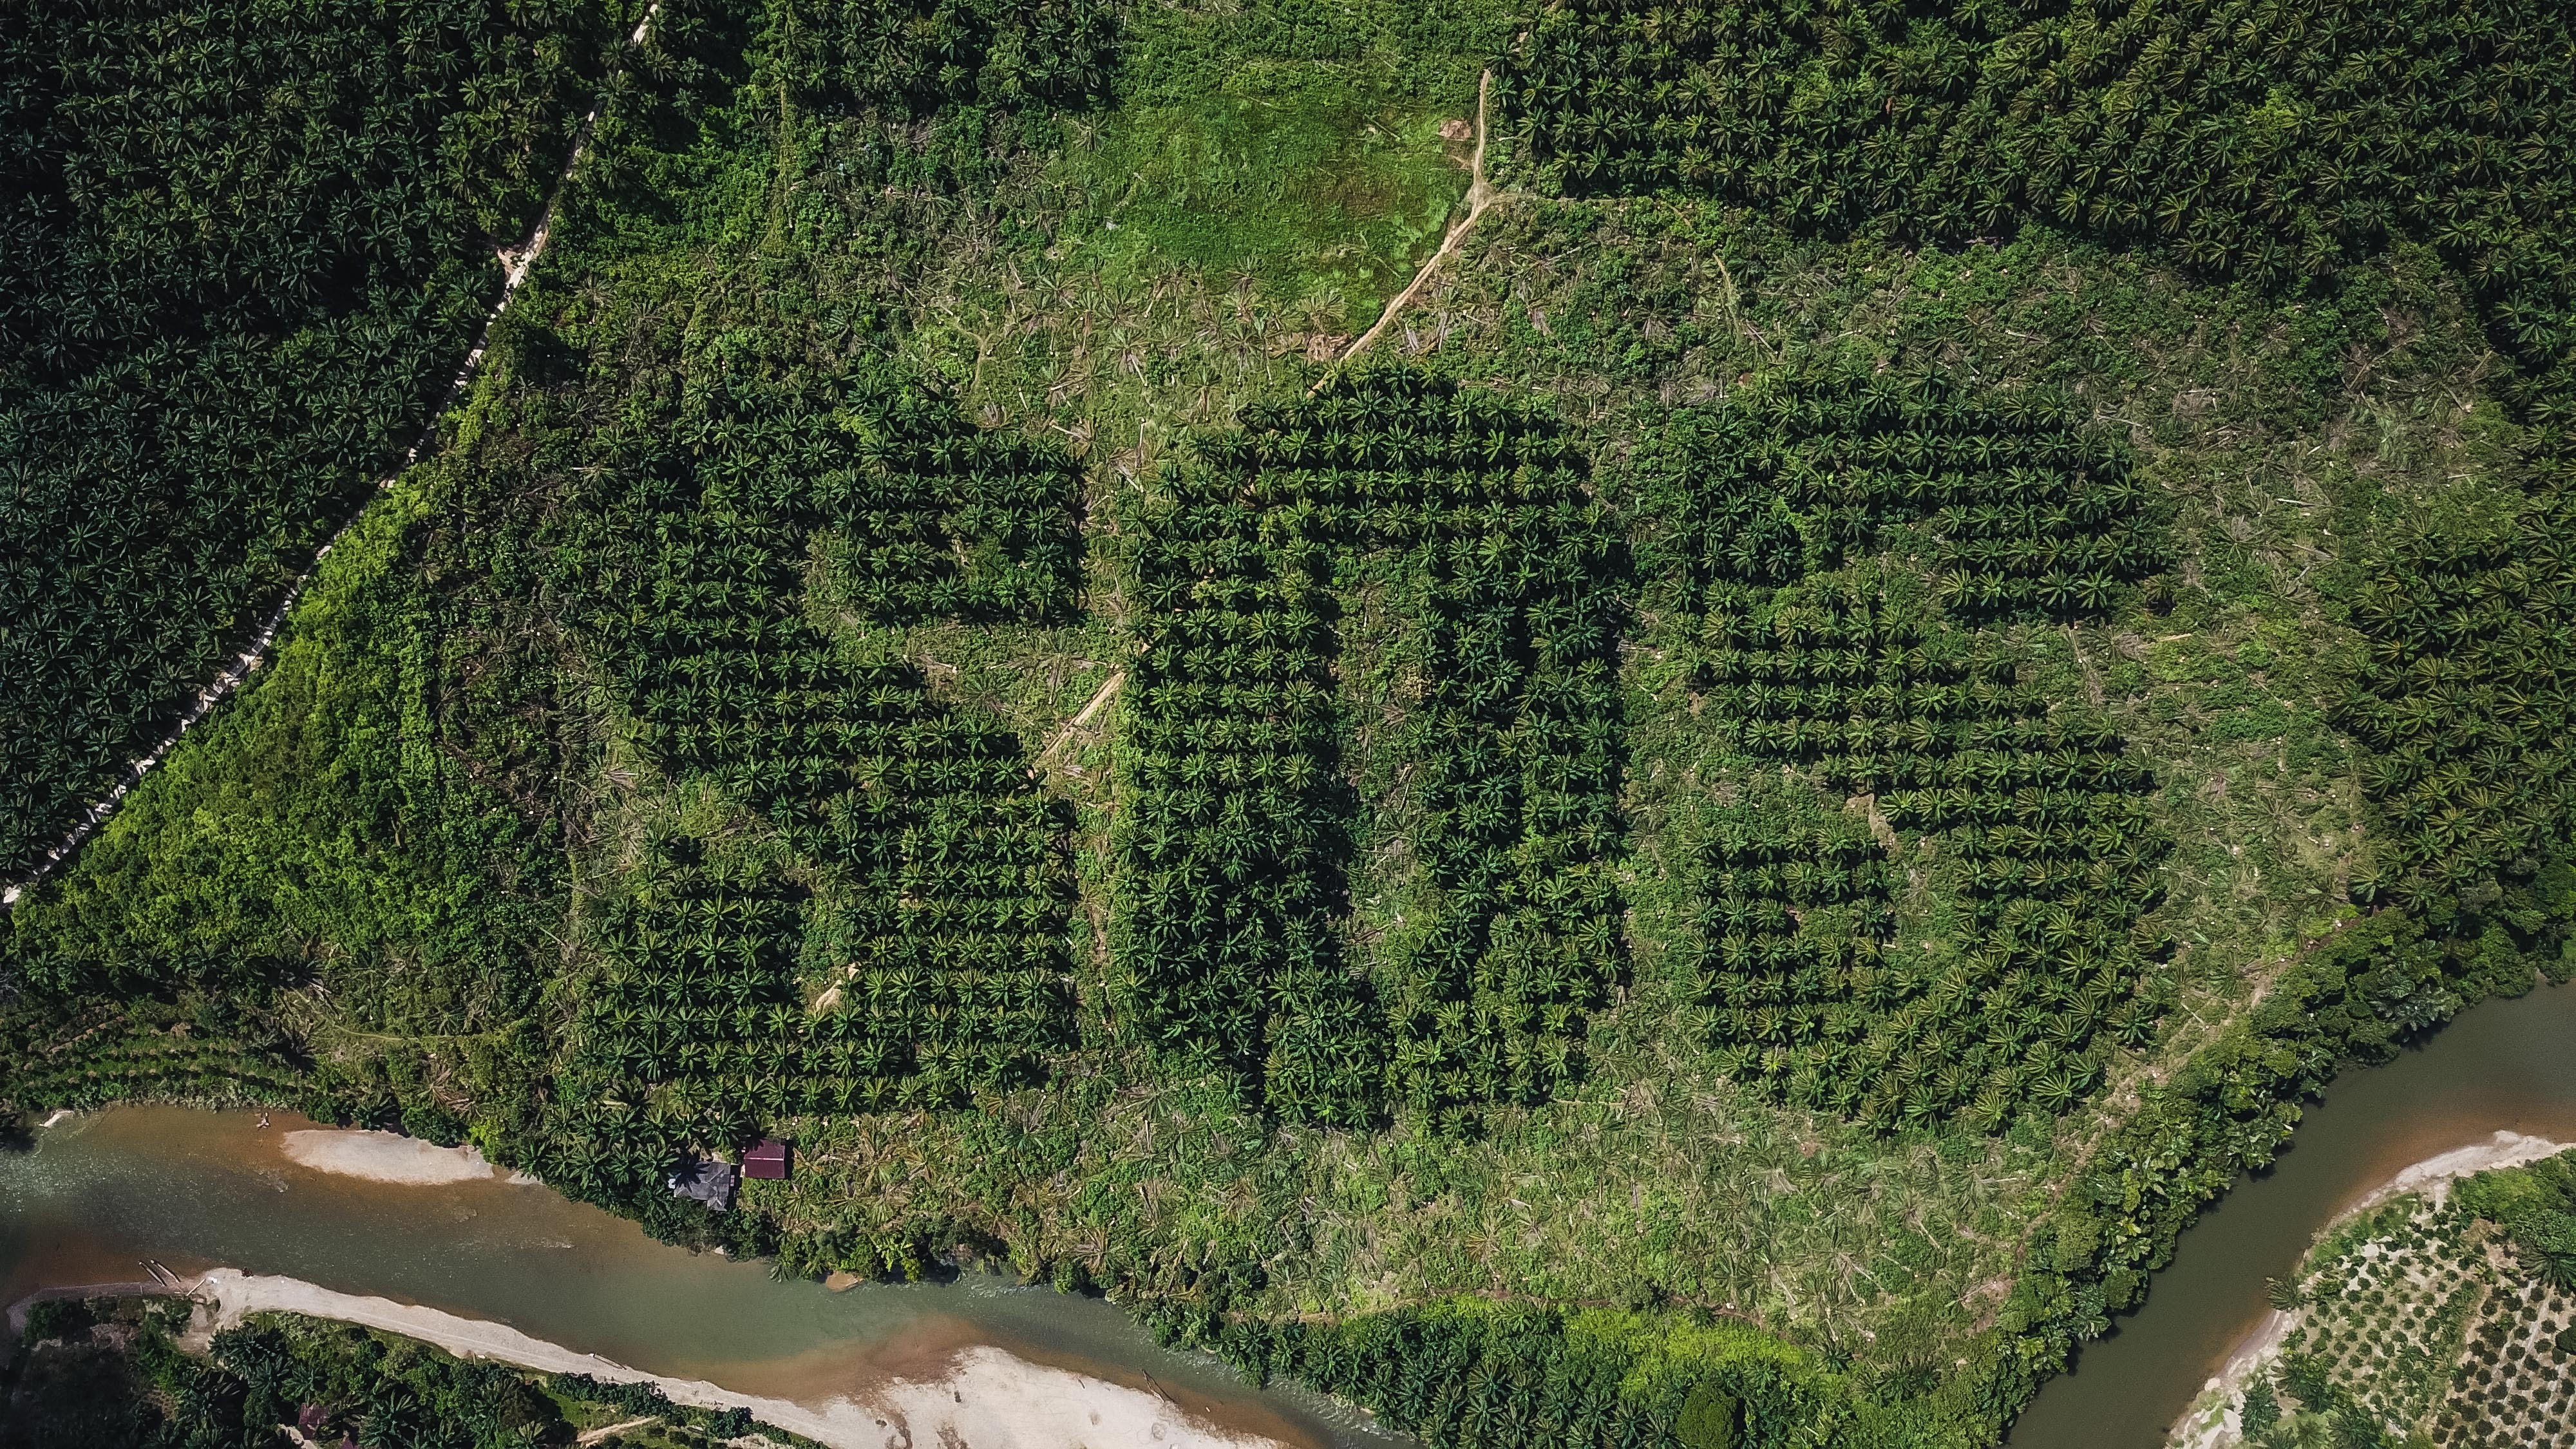 A giant SOS is carved into an oil palm plantation in Sumatra by Lithuanian artist Ernest Zacharevic to draw attention to the damage caused by deforestation to the wildlife and indigenous people of Indonesia. Photo: Reuters